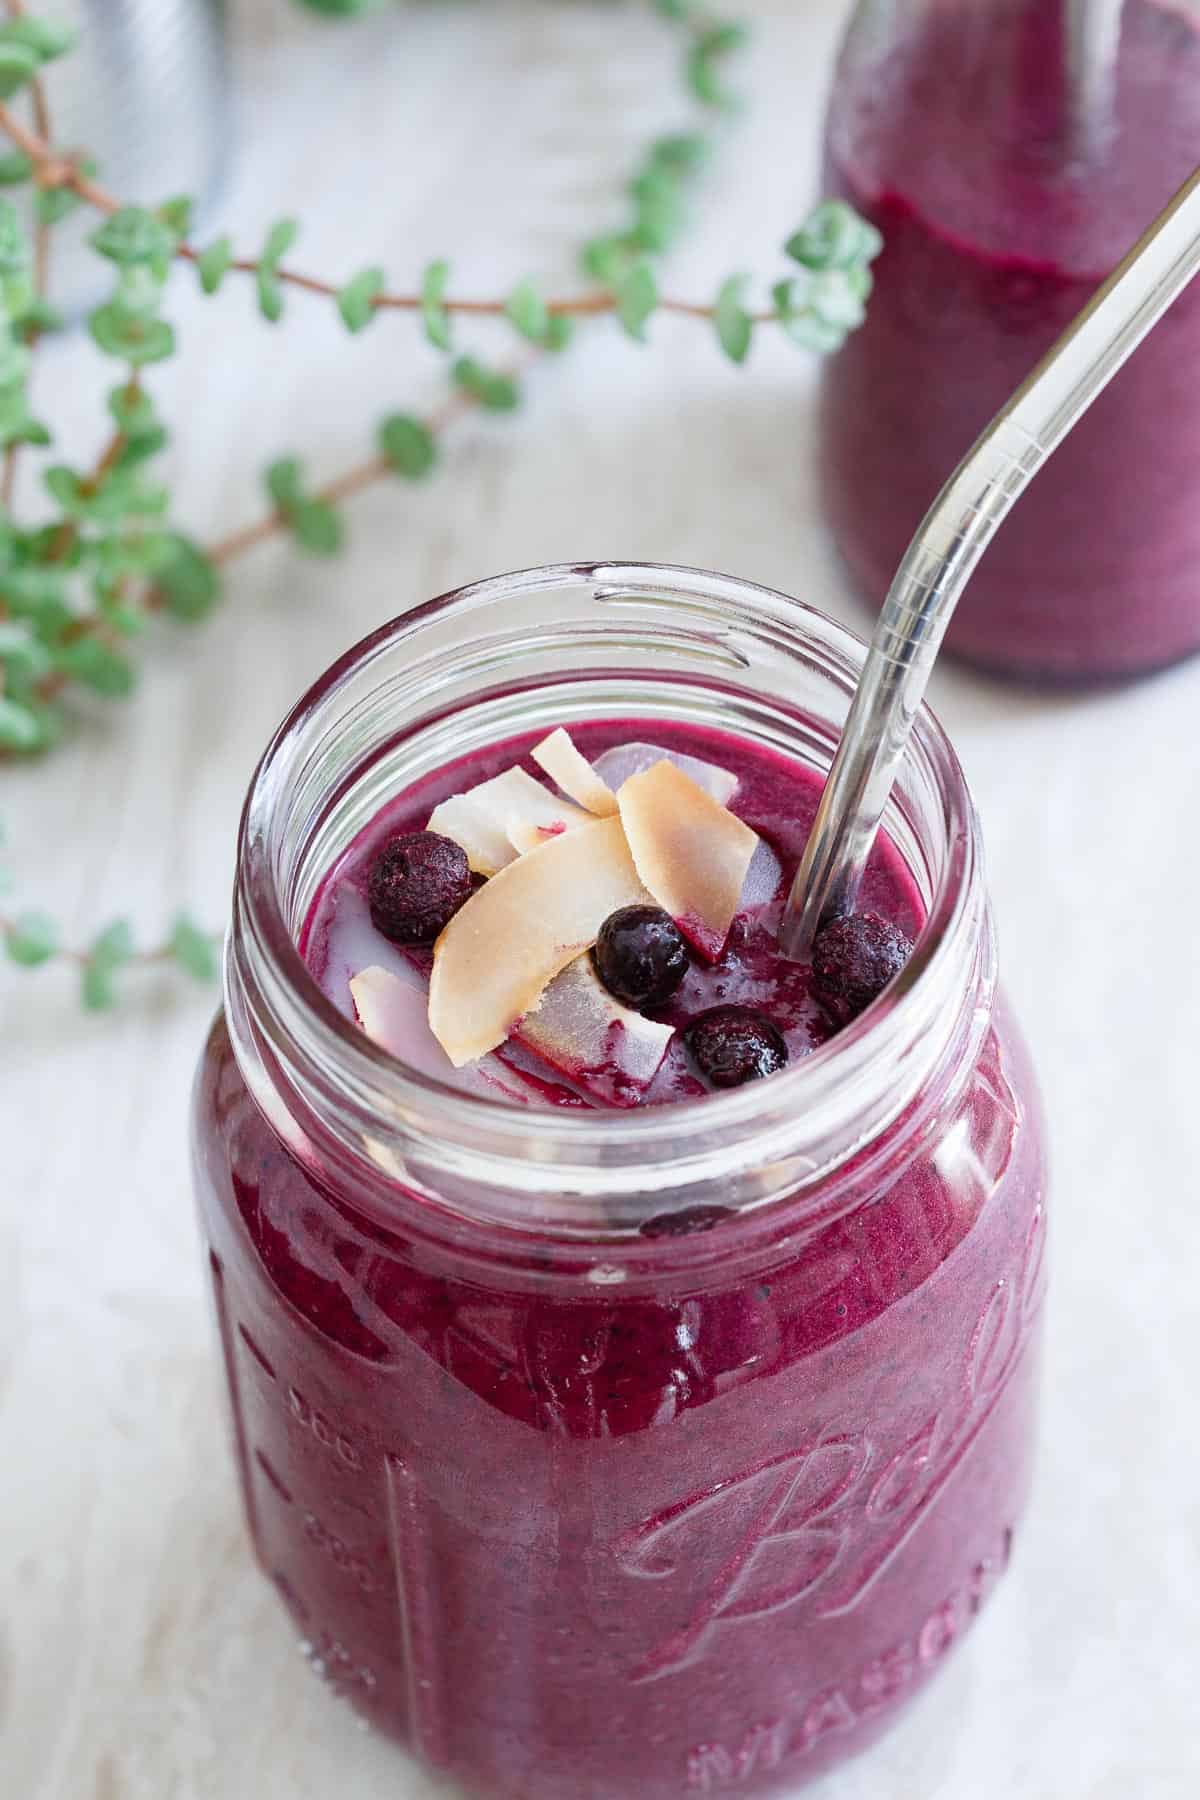 This paleo Wild Blueberry Beet Smoothie is creamy, earthy and slightly sweet, the perfect start to the day!